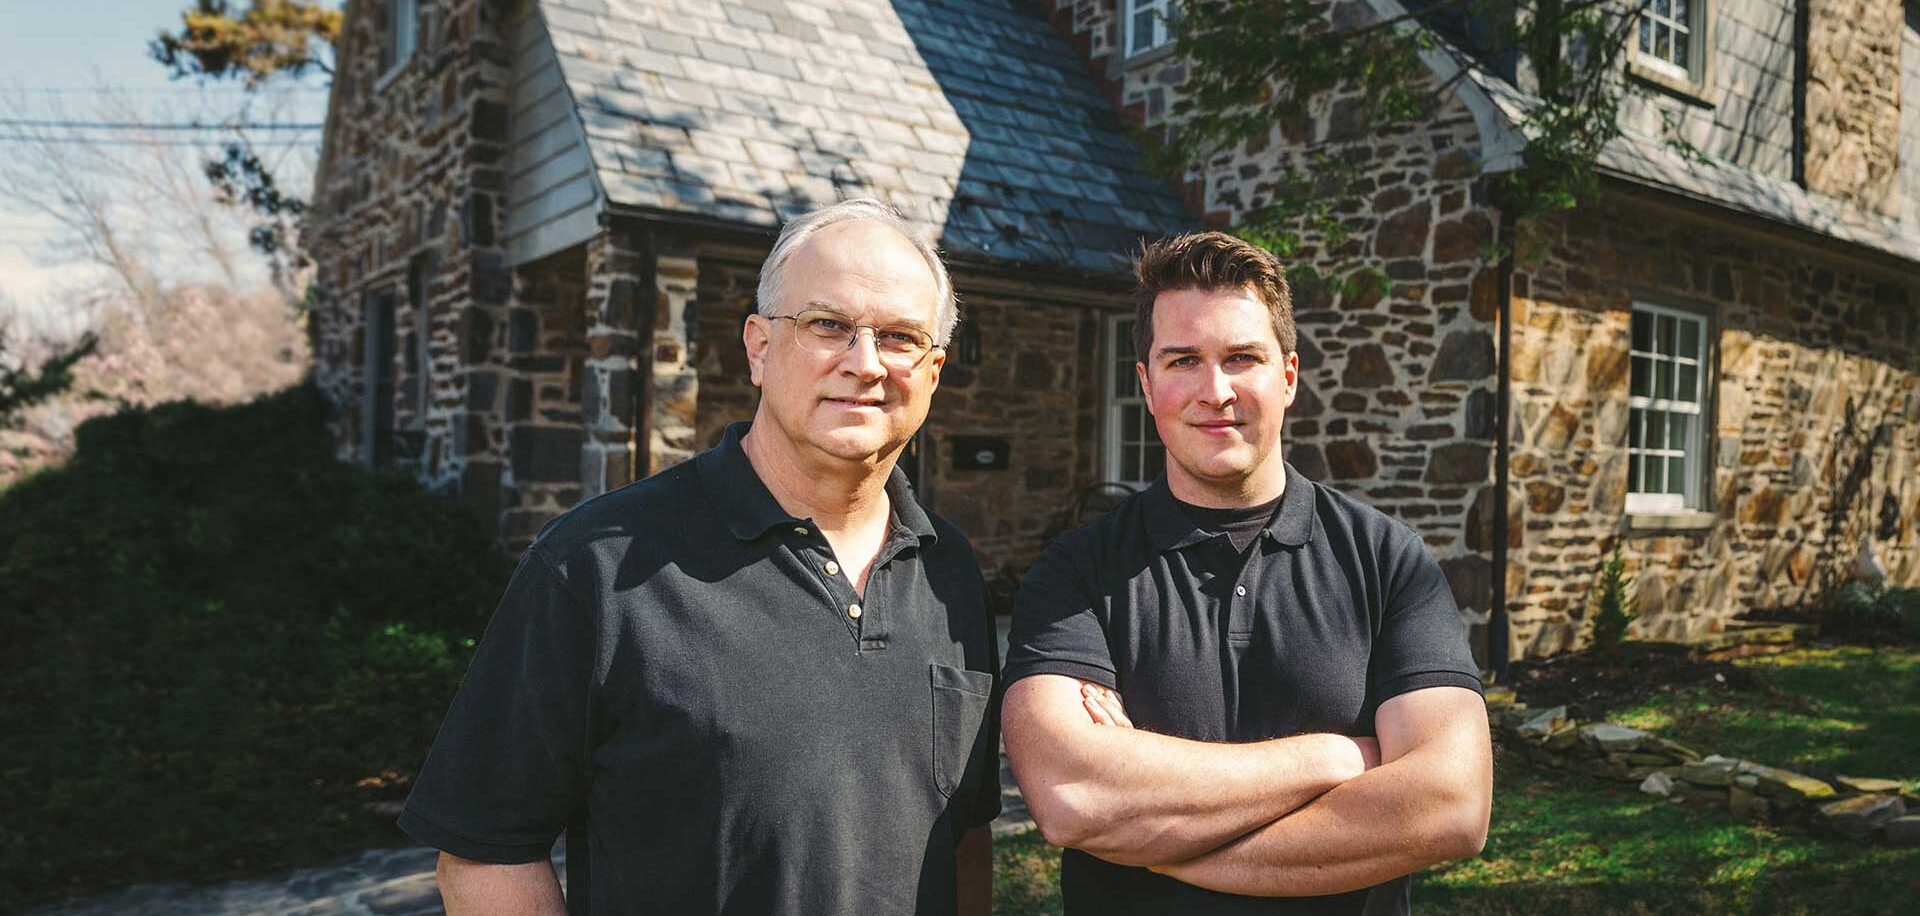 Frank & Sam Taciak of C.A. Taciak & Sons standing in front of an english style stone house